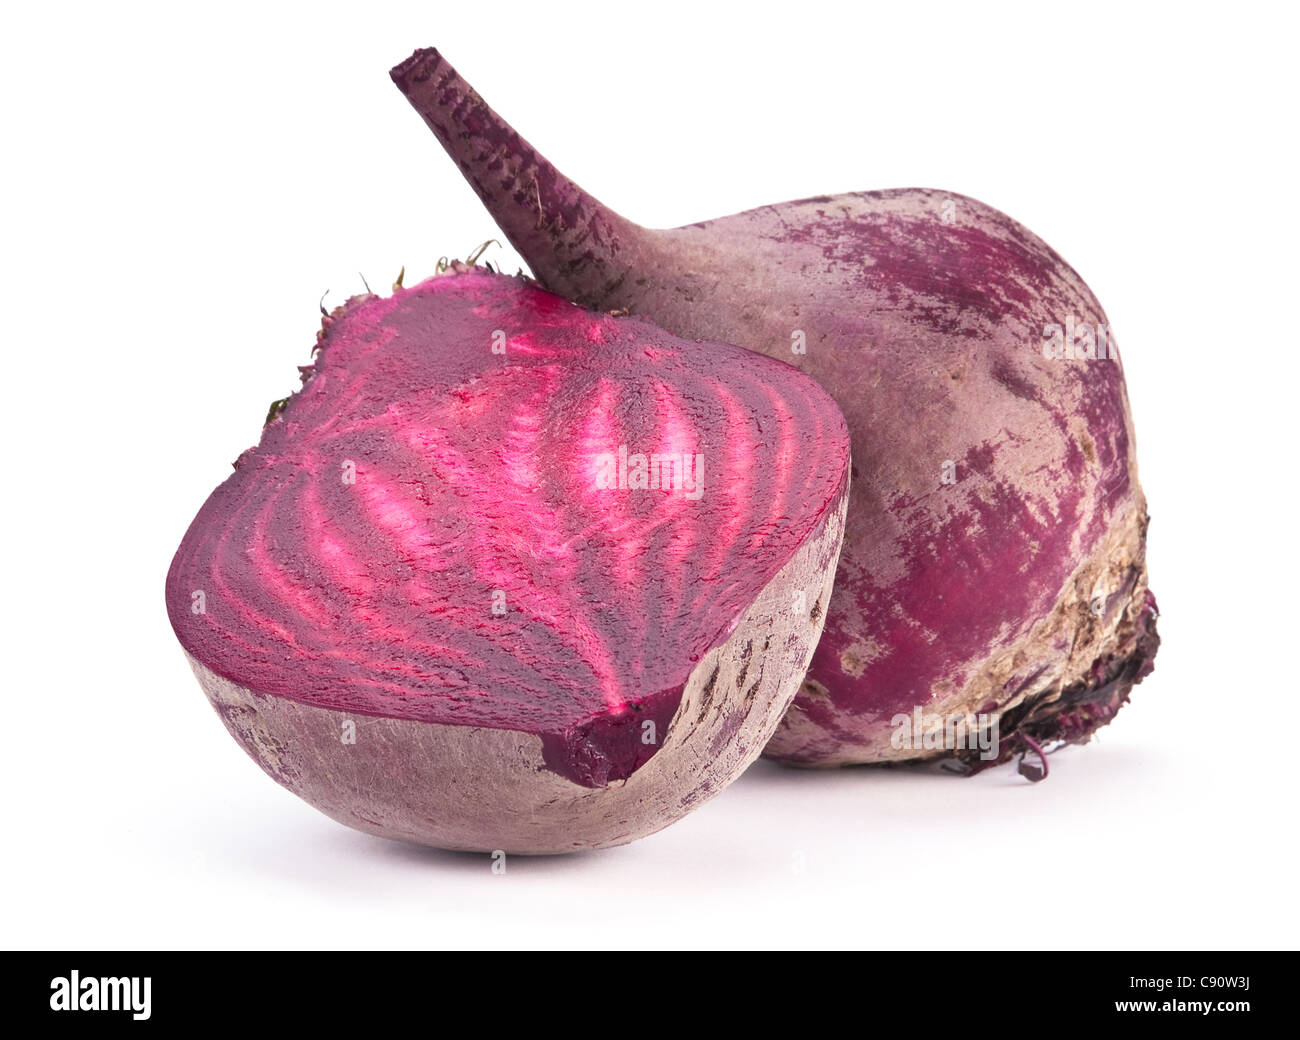 Ripe beet root vegetable isolated on white Stock Photo